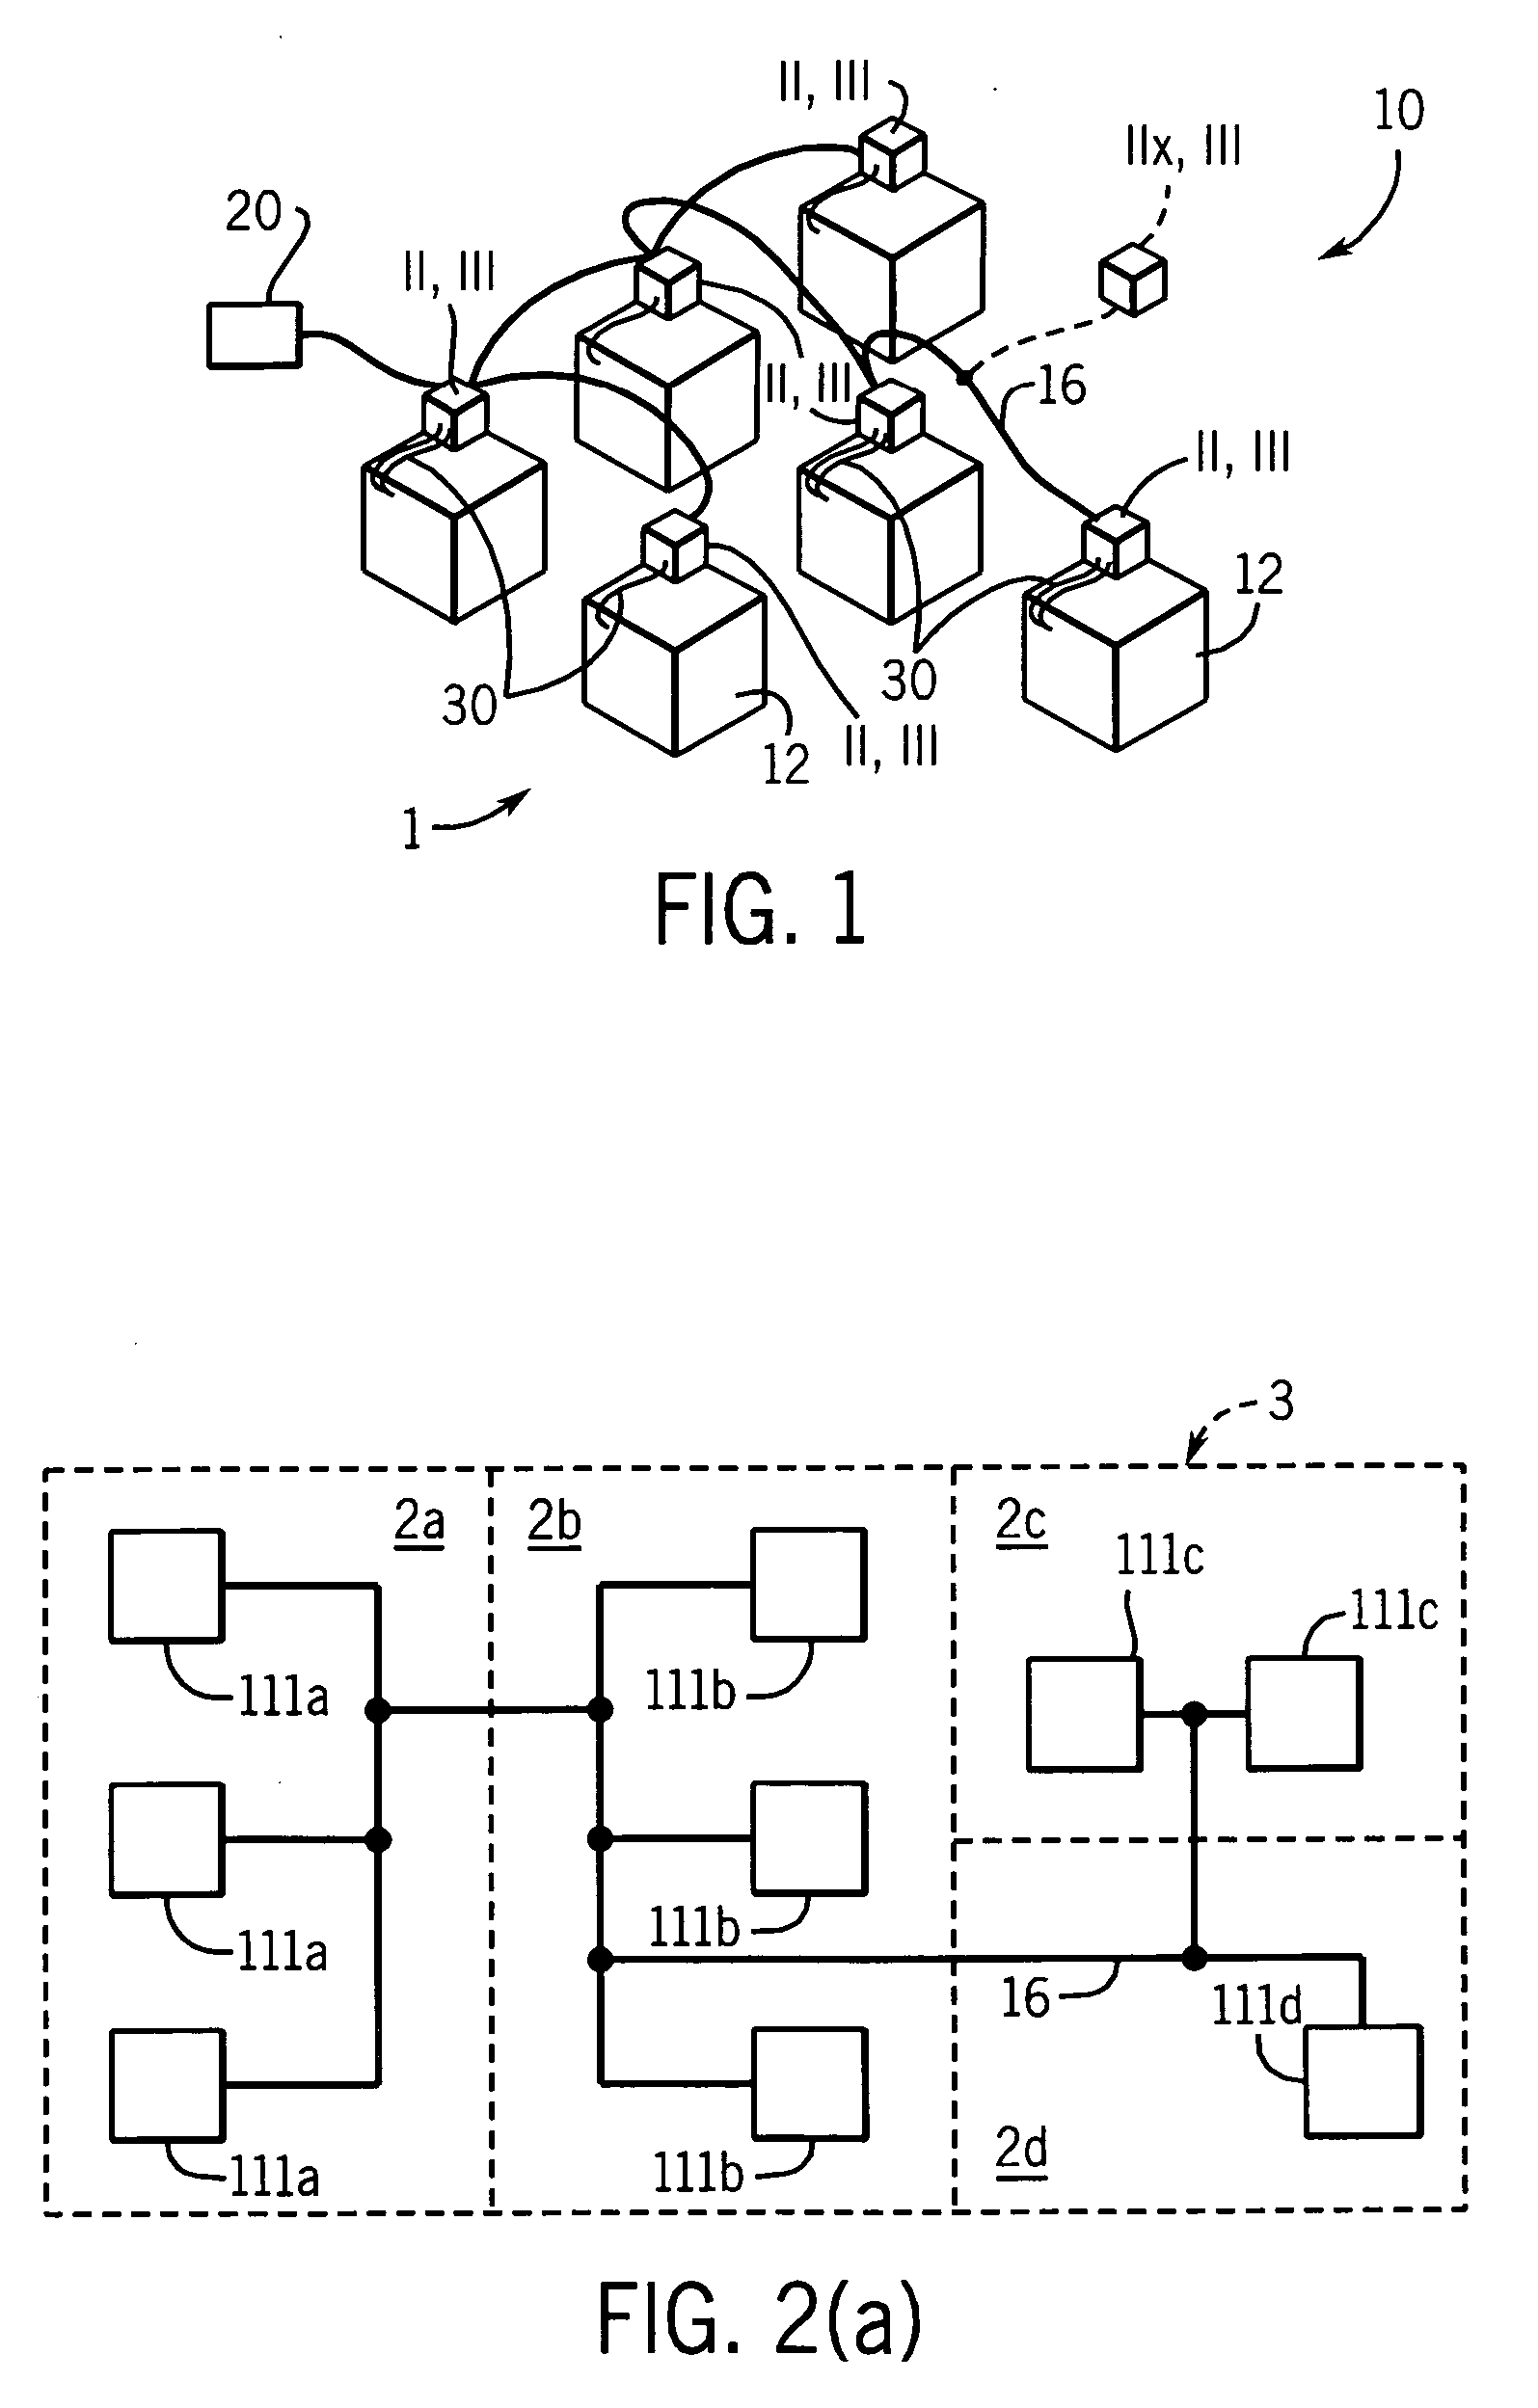 Integrated multi-agent system employing agents of different types